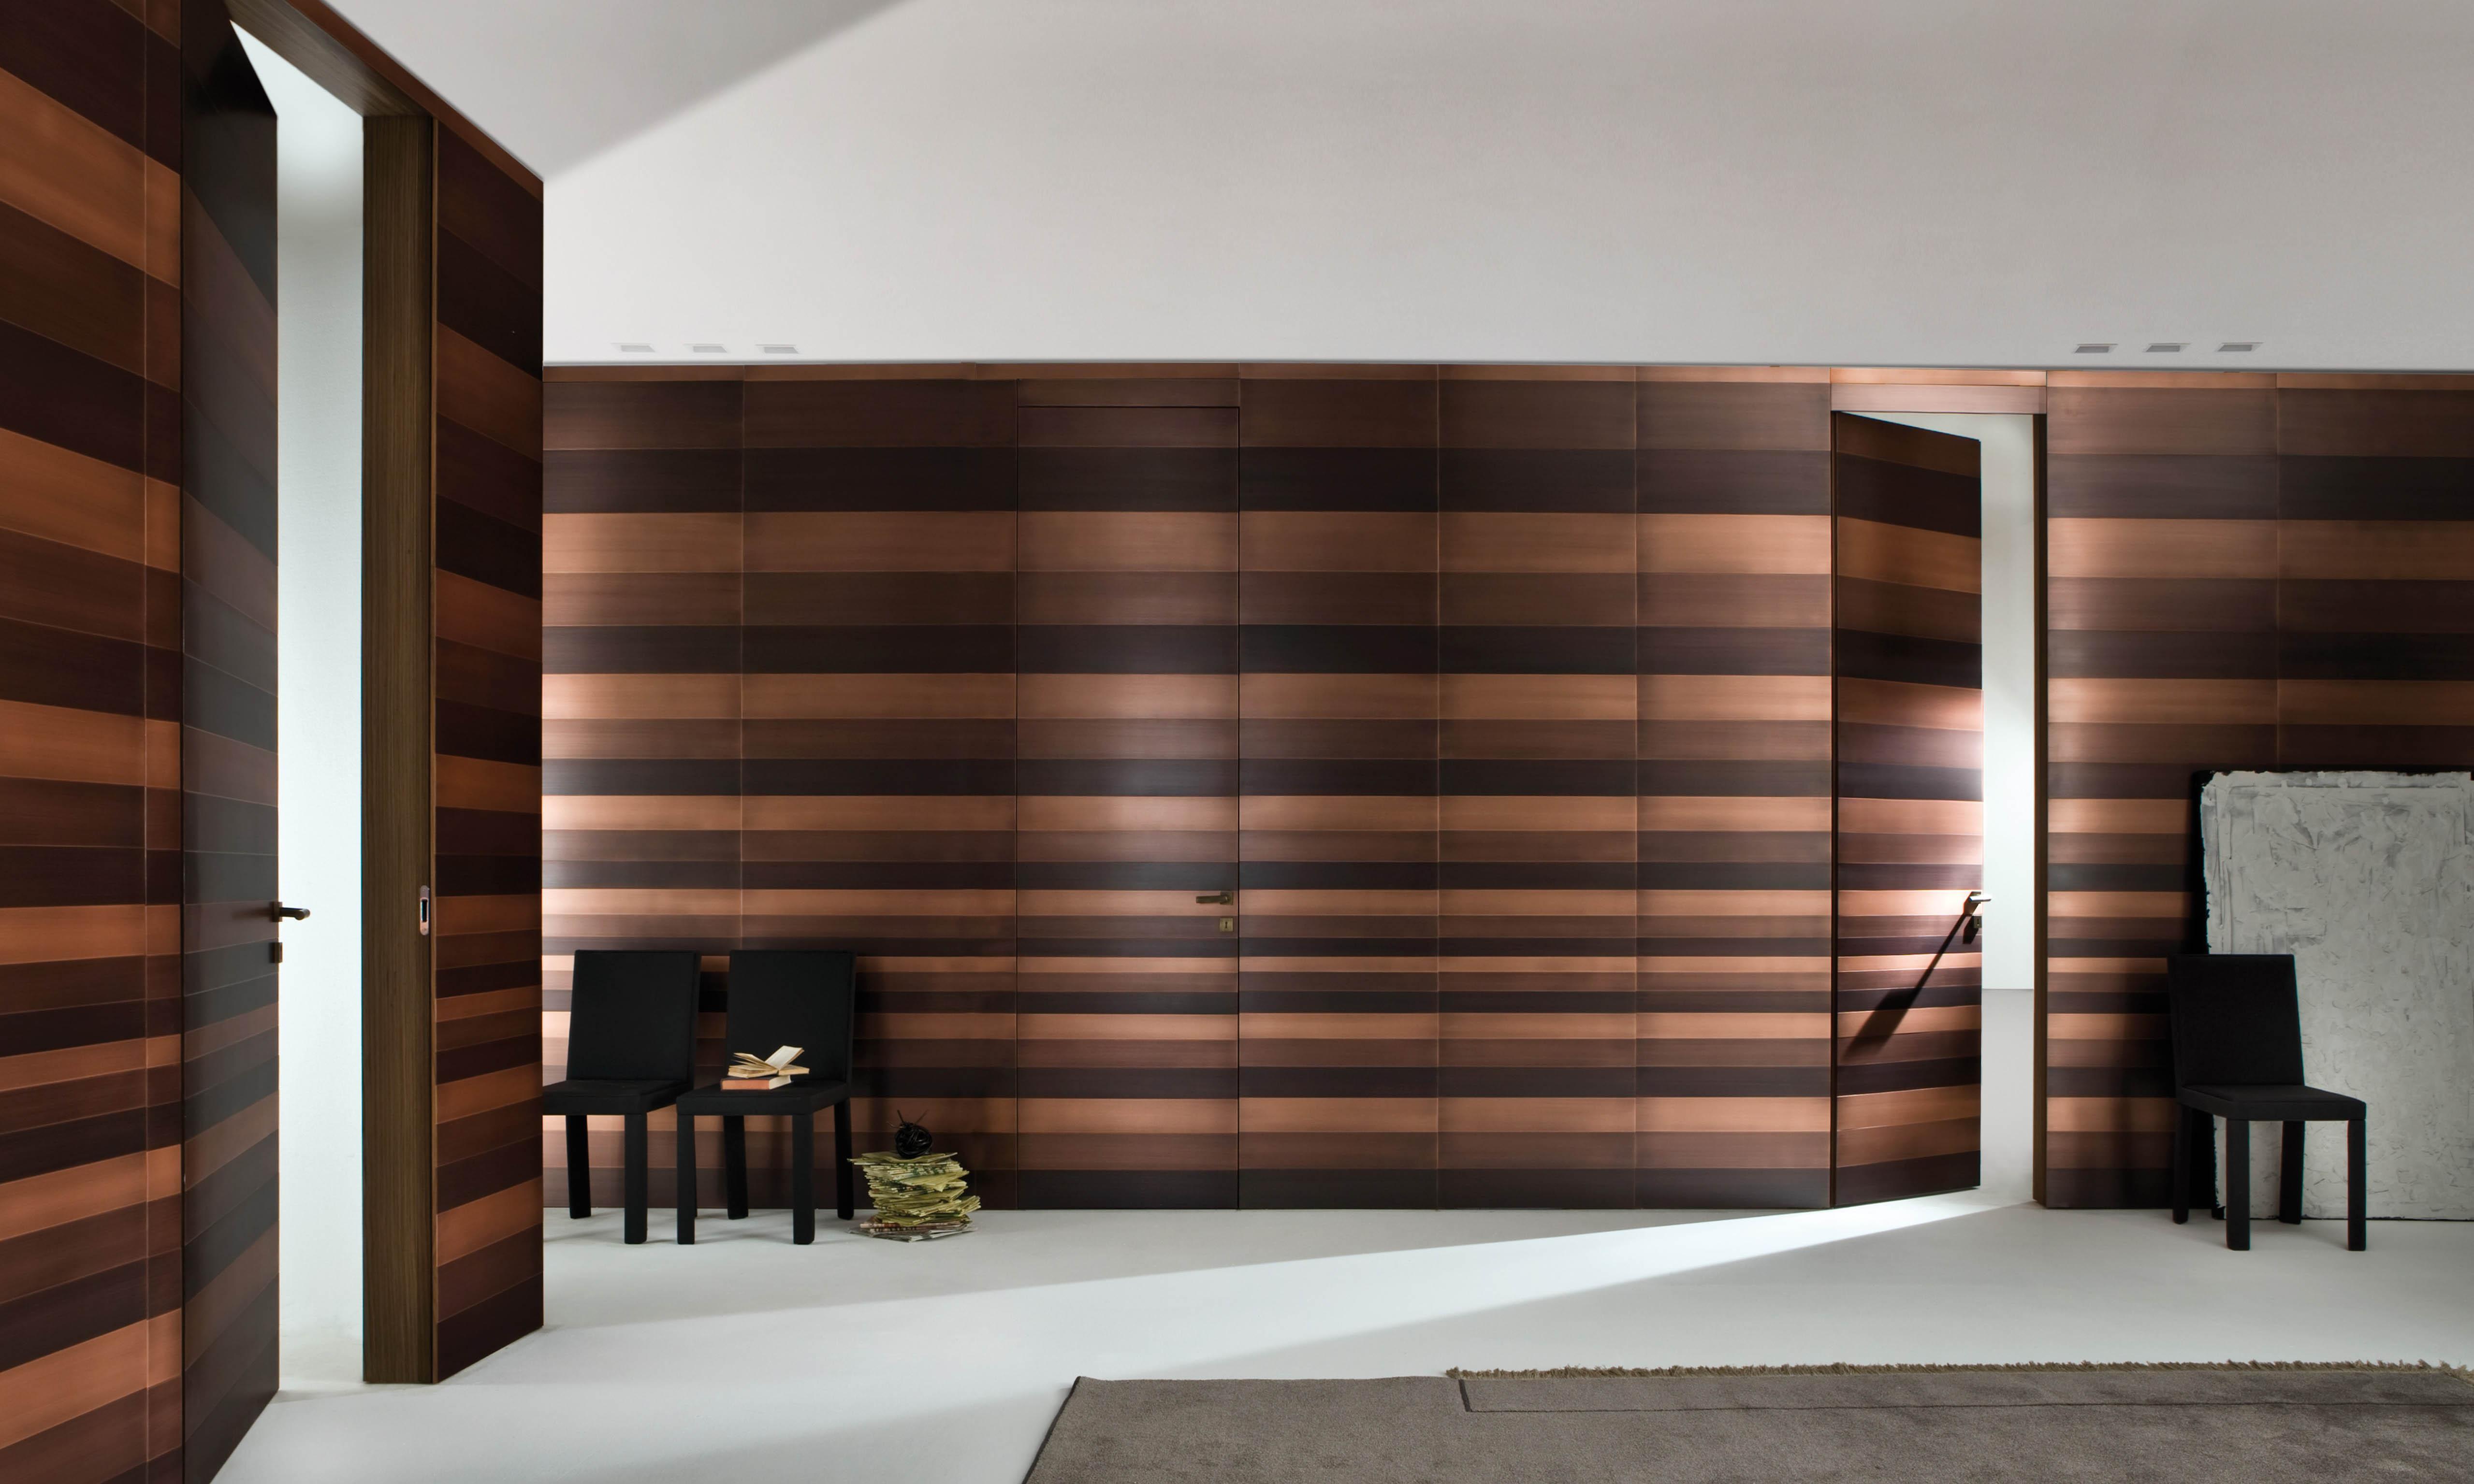 Laurameroni luxury modern integrated wall panels for a bespoke artisanal interior design and decor